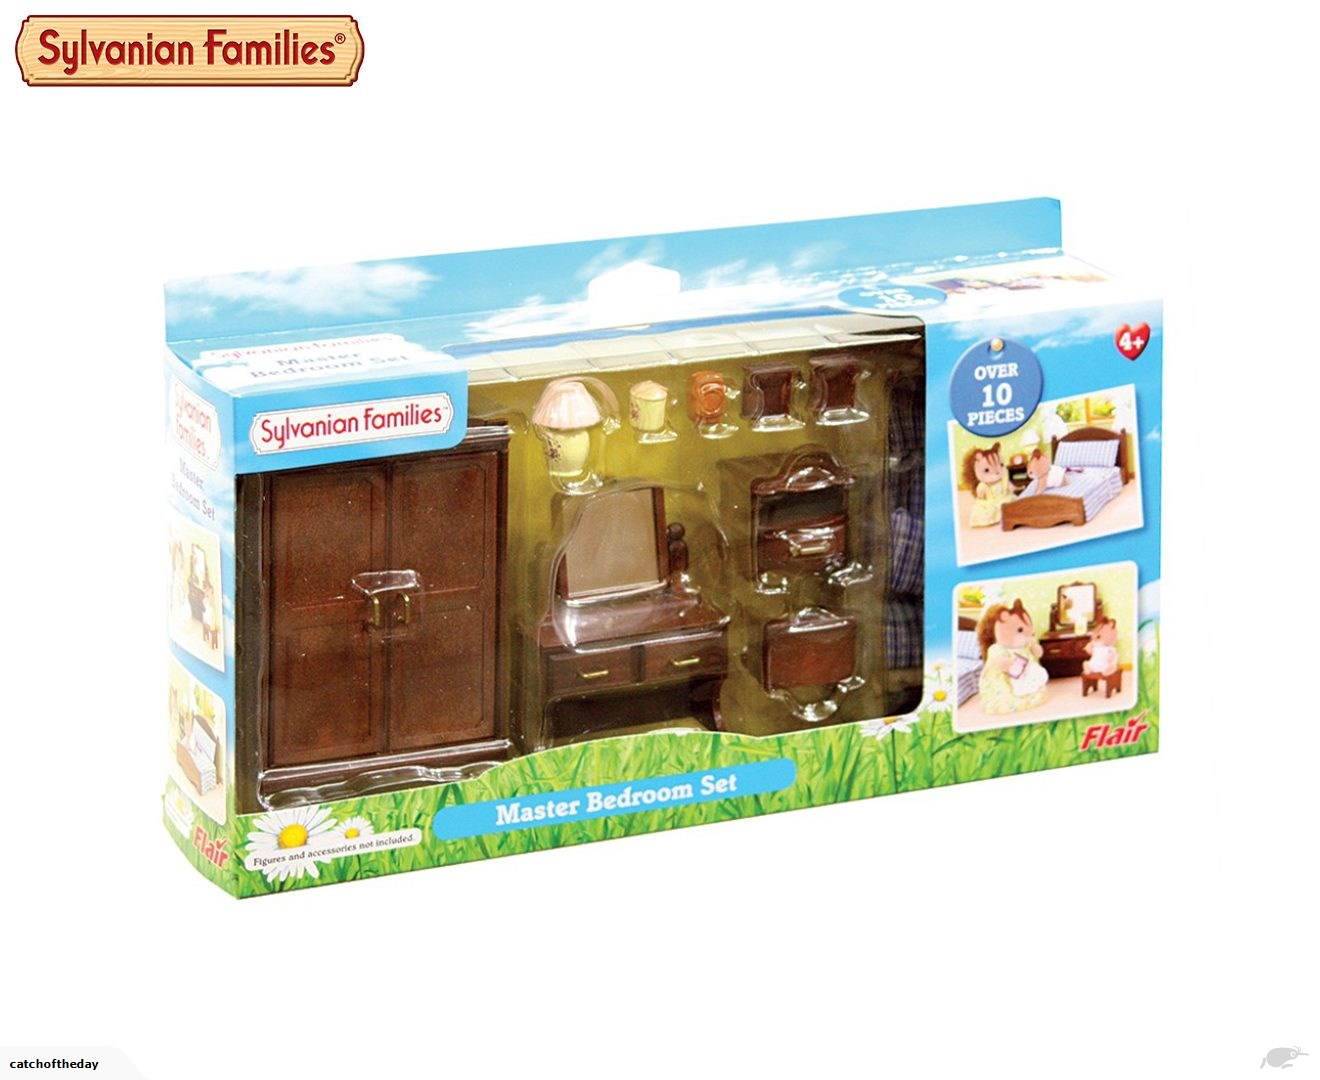 Sylvanian Families Master Bedroom Set In Multi Dolls Playsets for size 1320 X 1080